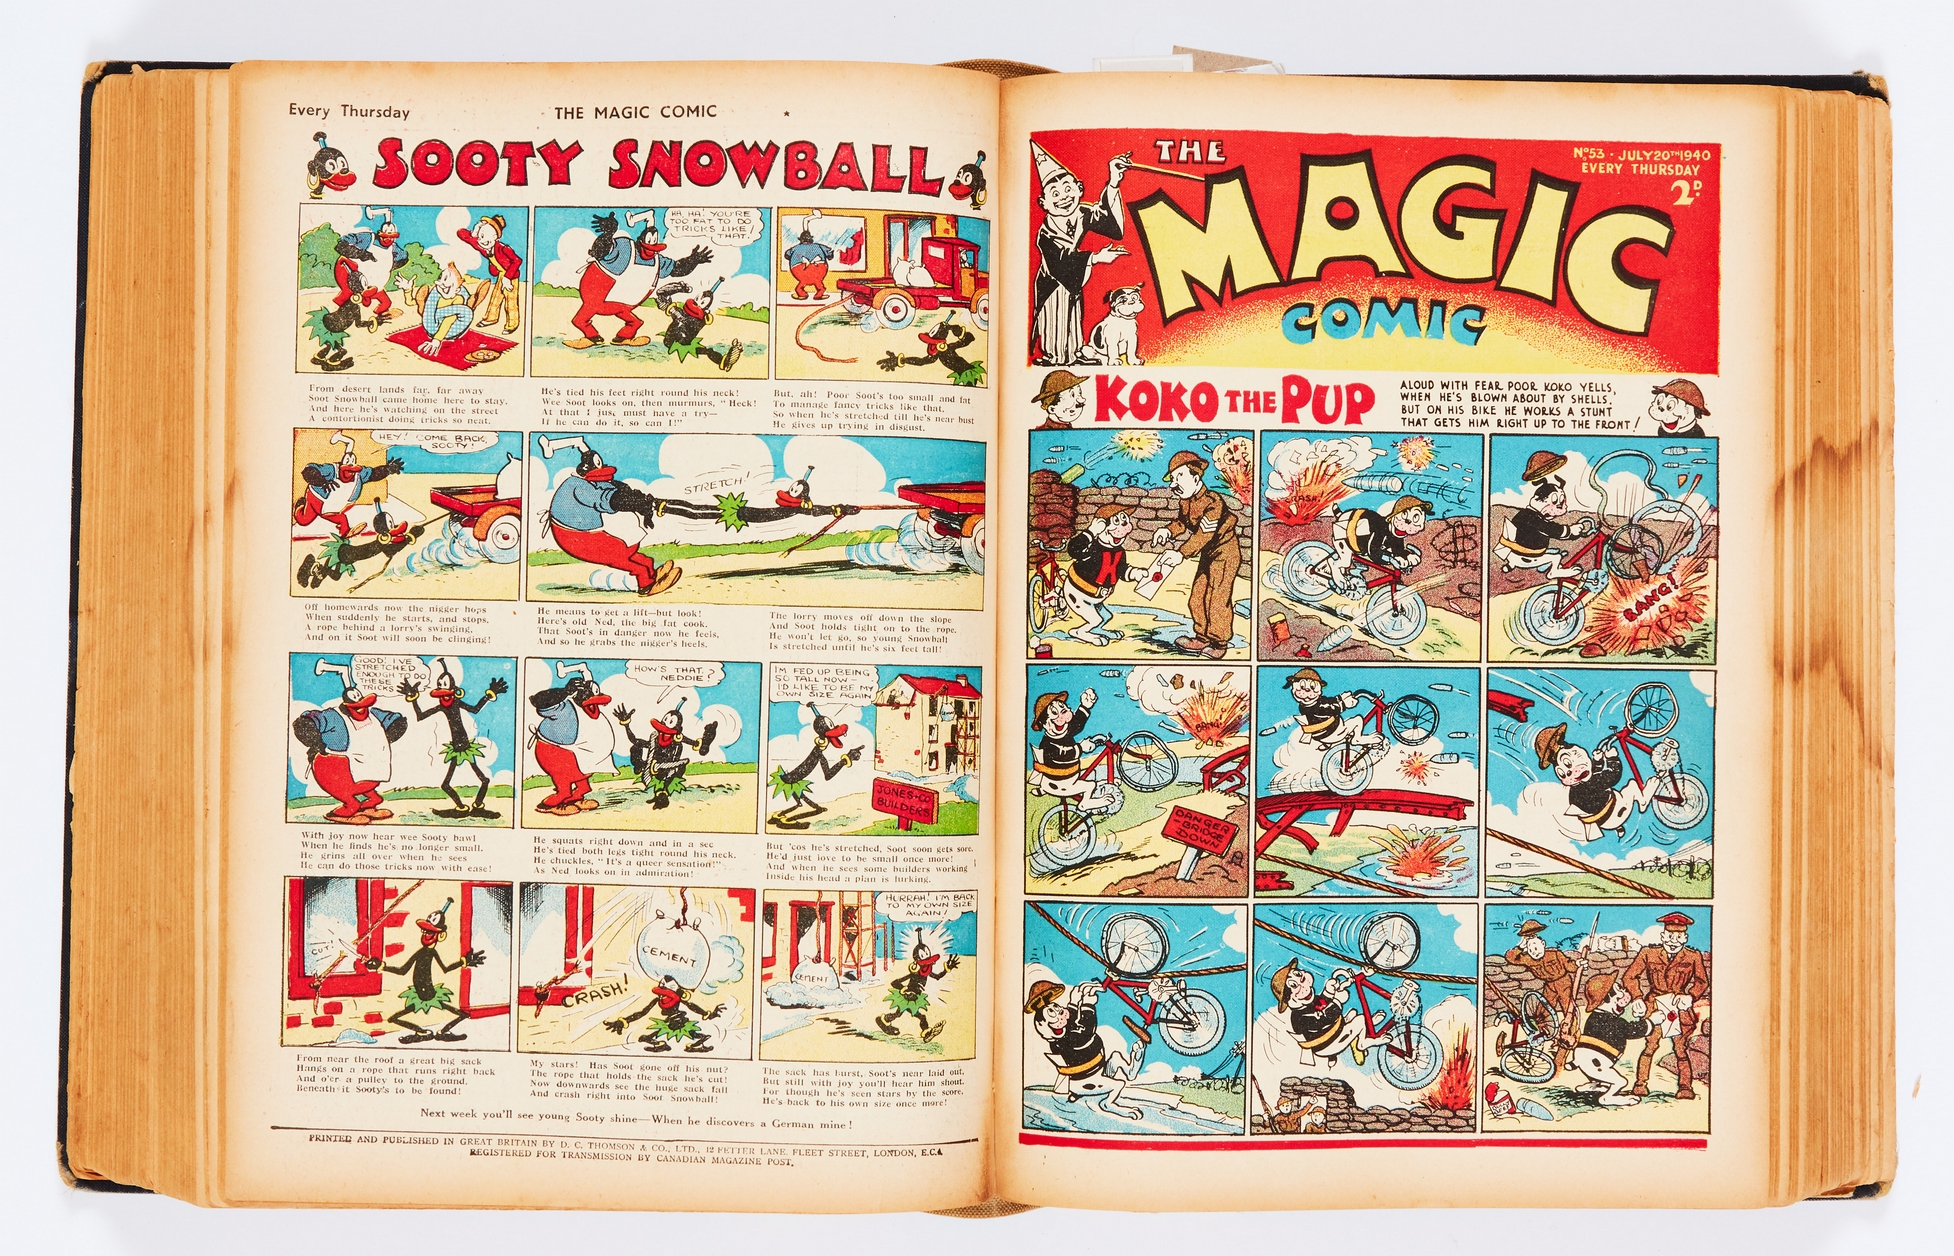 Magic Comic (1940-41) 25-80 (final issue). In bound volume. Propaganda war issues. E. H. Banger's - Image 5 of 9